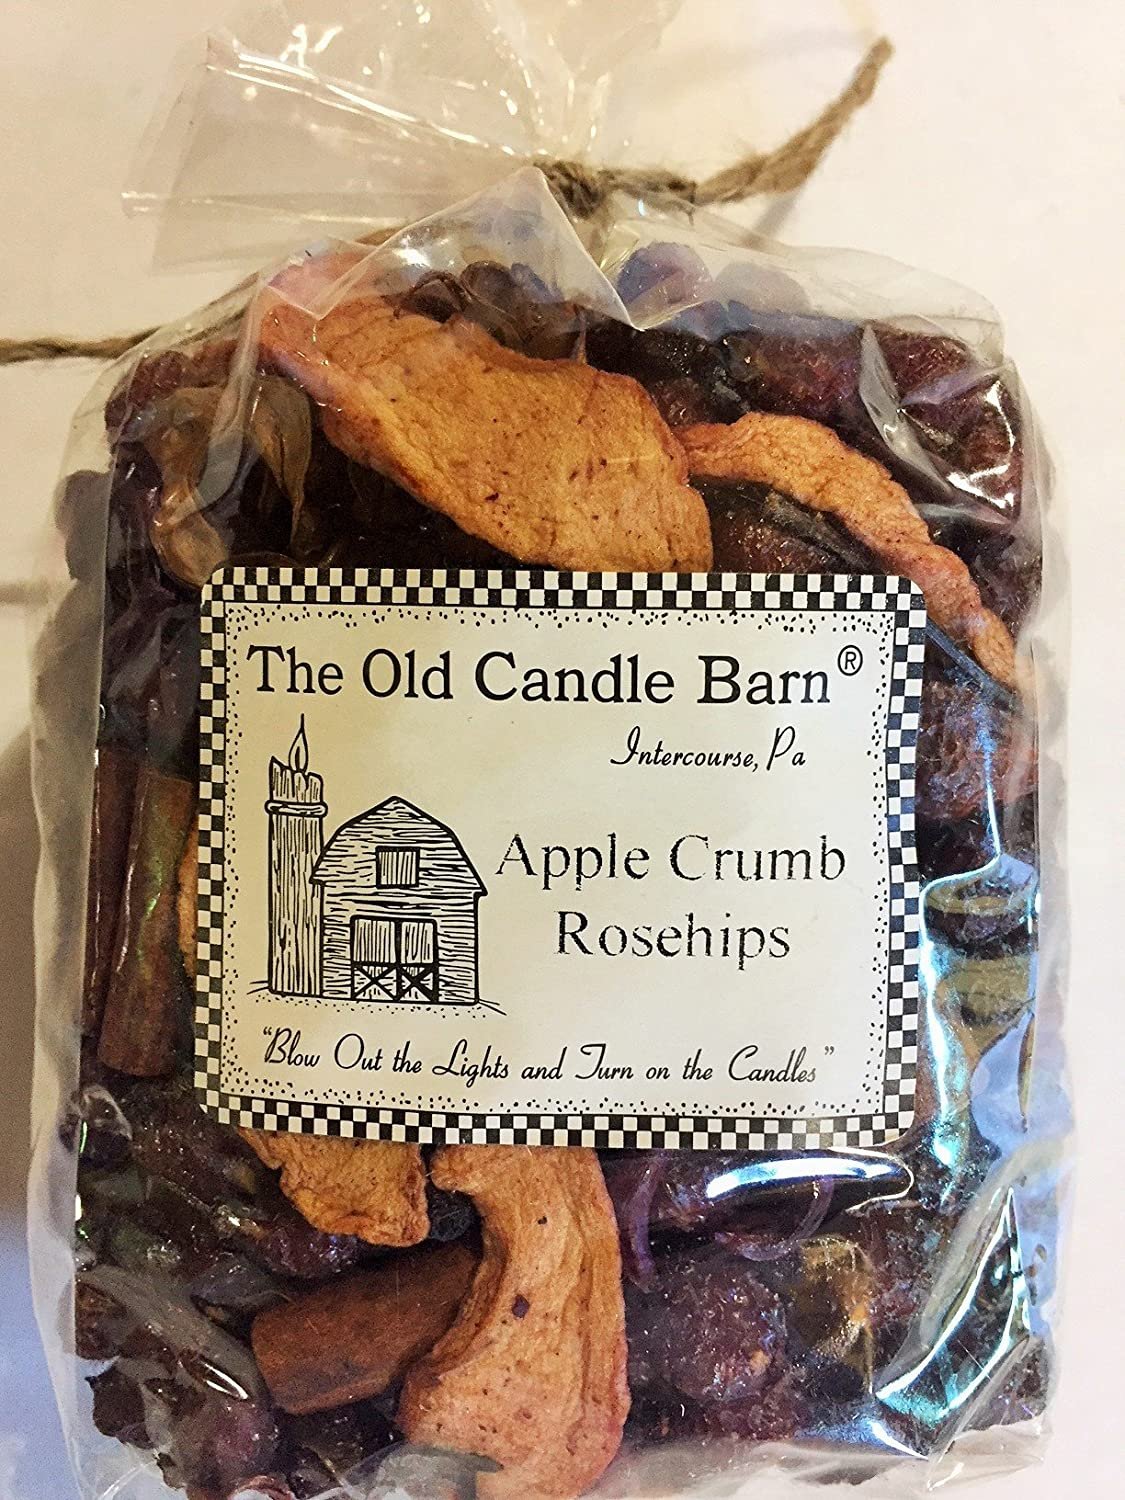 Old Candle Barn Apple Crumb Rosehips 4 Cup Bag - Well Scented Potpourri - Made in USA